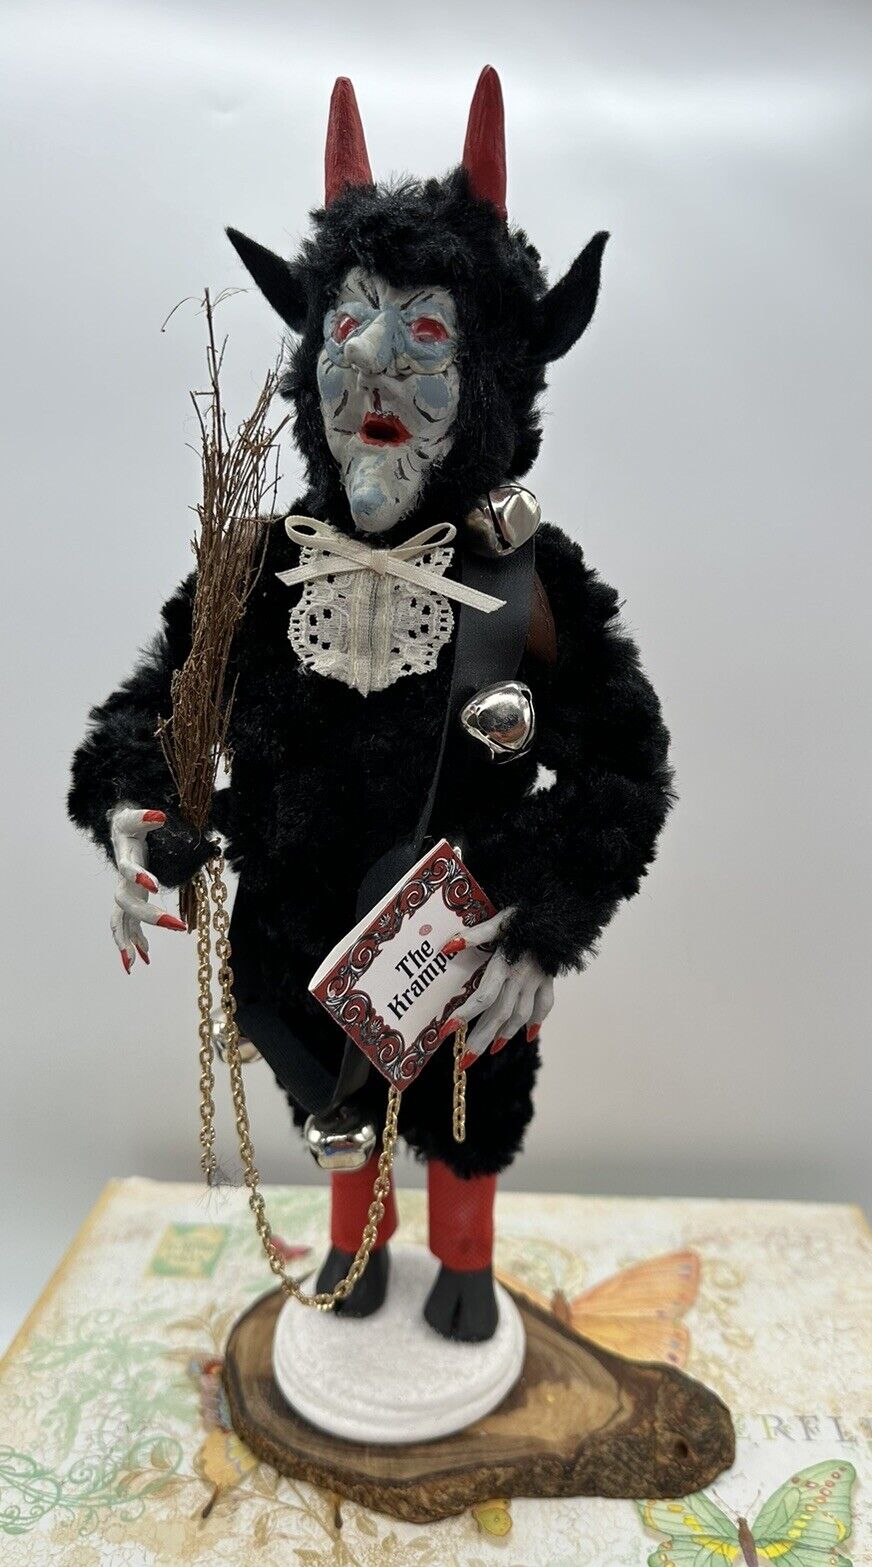 2015 BYERS\' CHOICE KRAMPUS ~THE GERMAN CHRISTMAS DEVIL~ ALTERED/REVISED